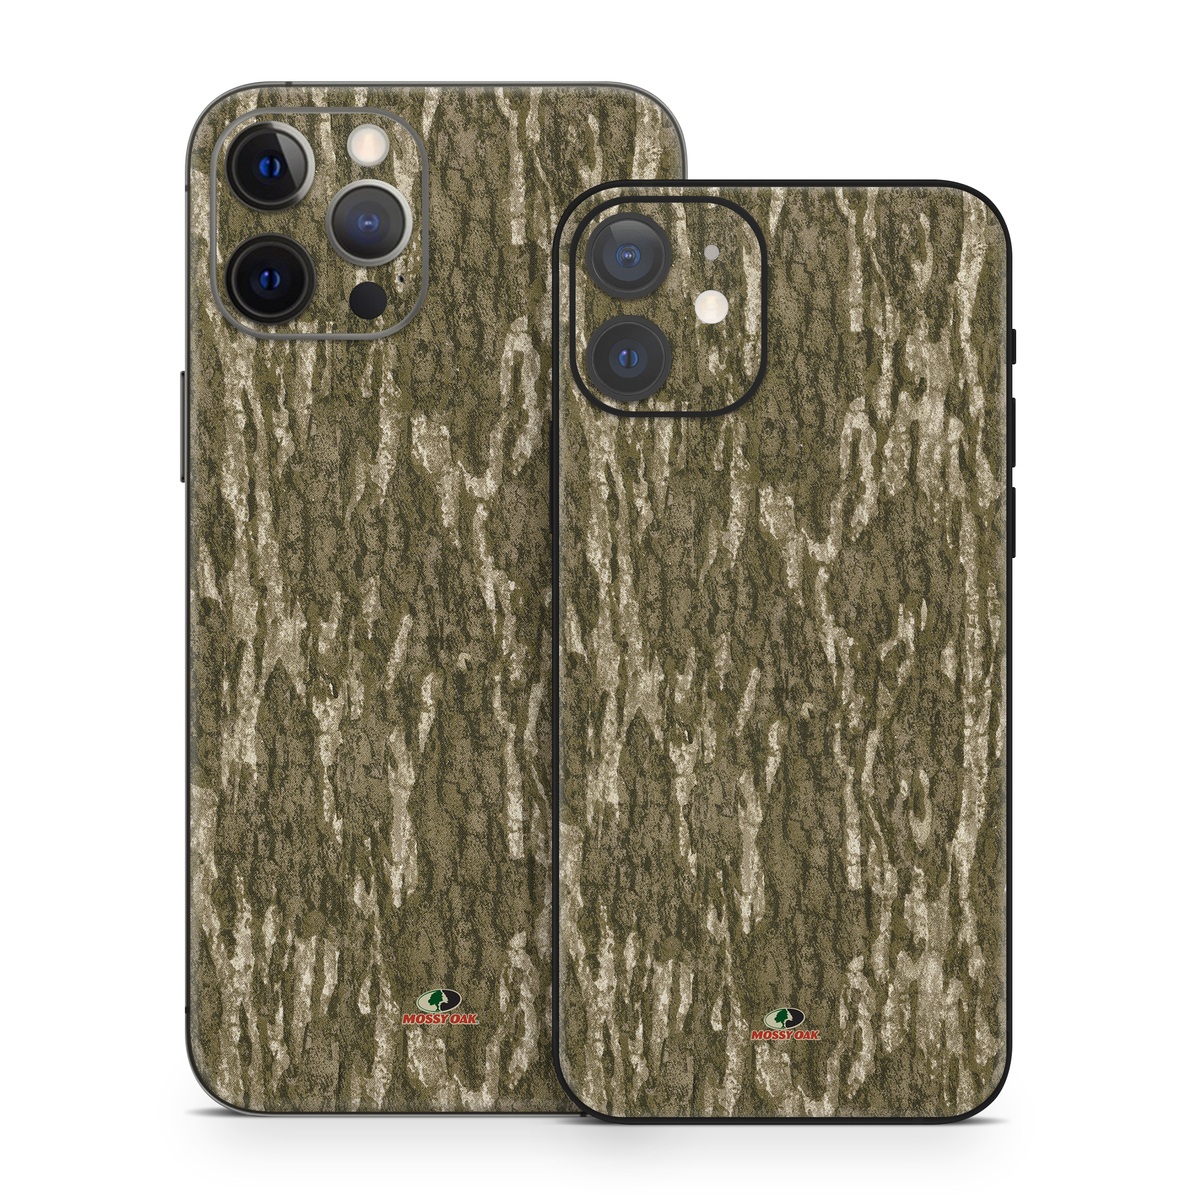 iPhone 12 Series Skin design of Grass, Brown, Grass family, Plant, Soil, with black, red, gray colors